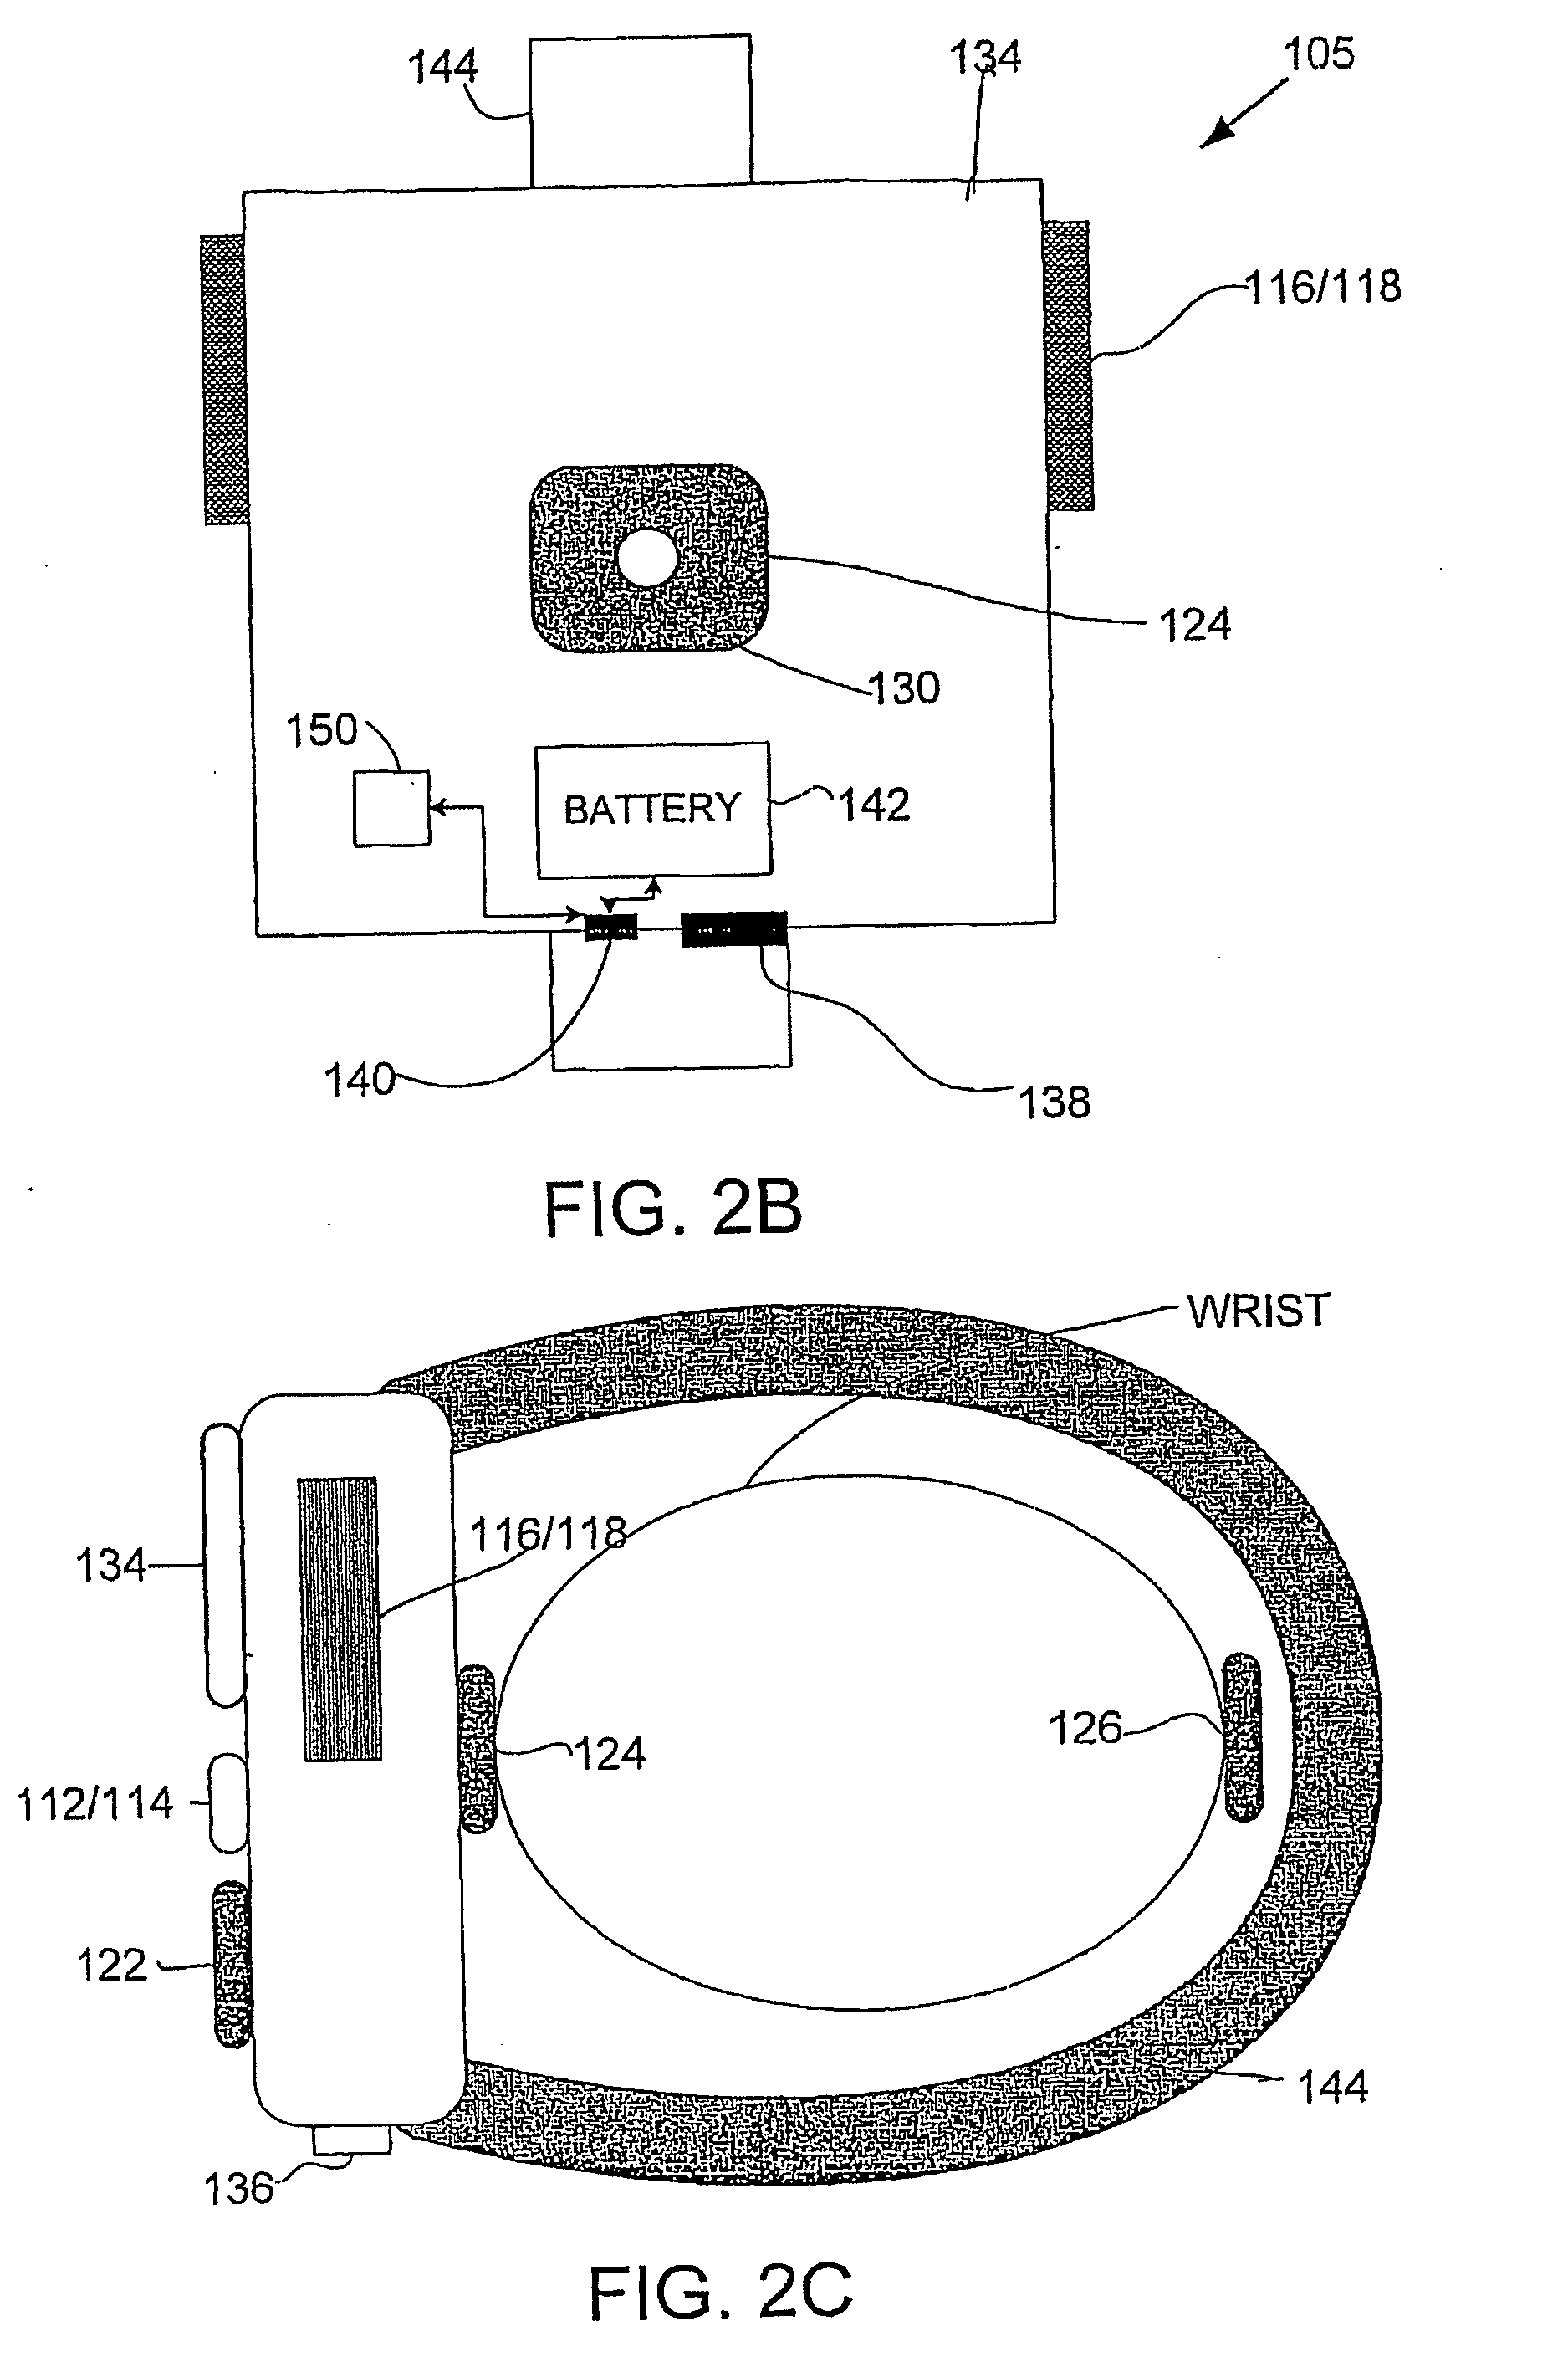 Wearable Device, System and Method for Measuring Physiological and/or Environmental Parameters